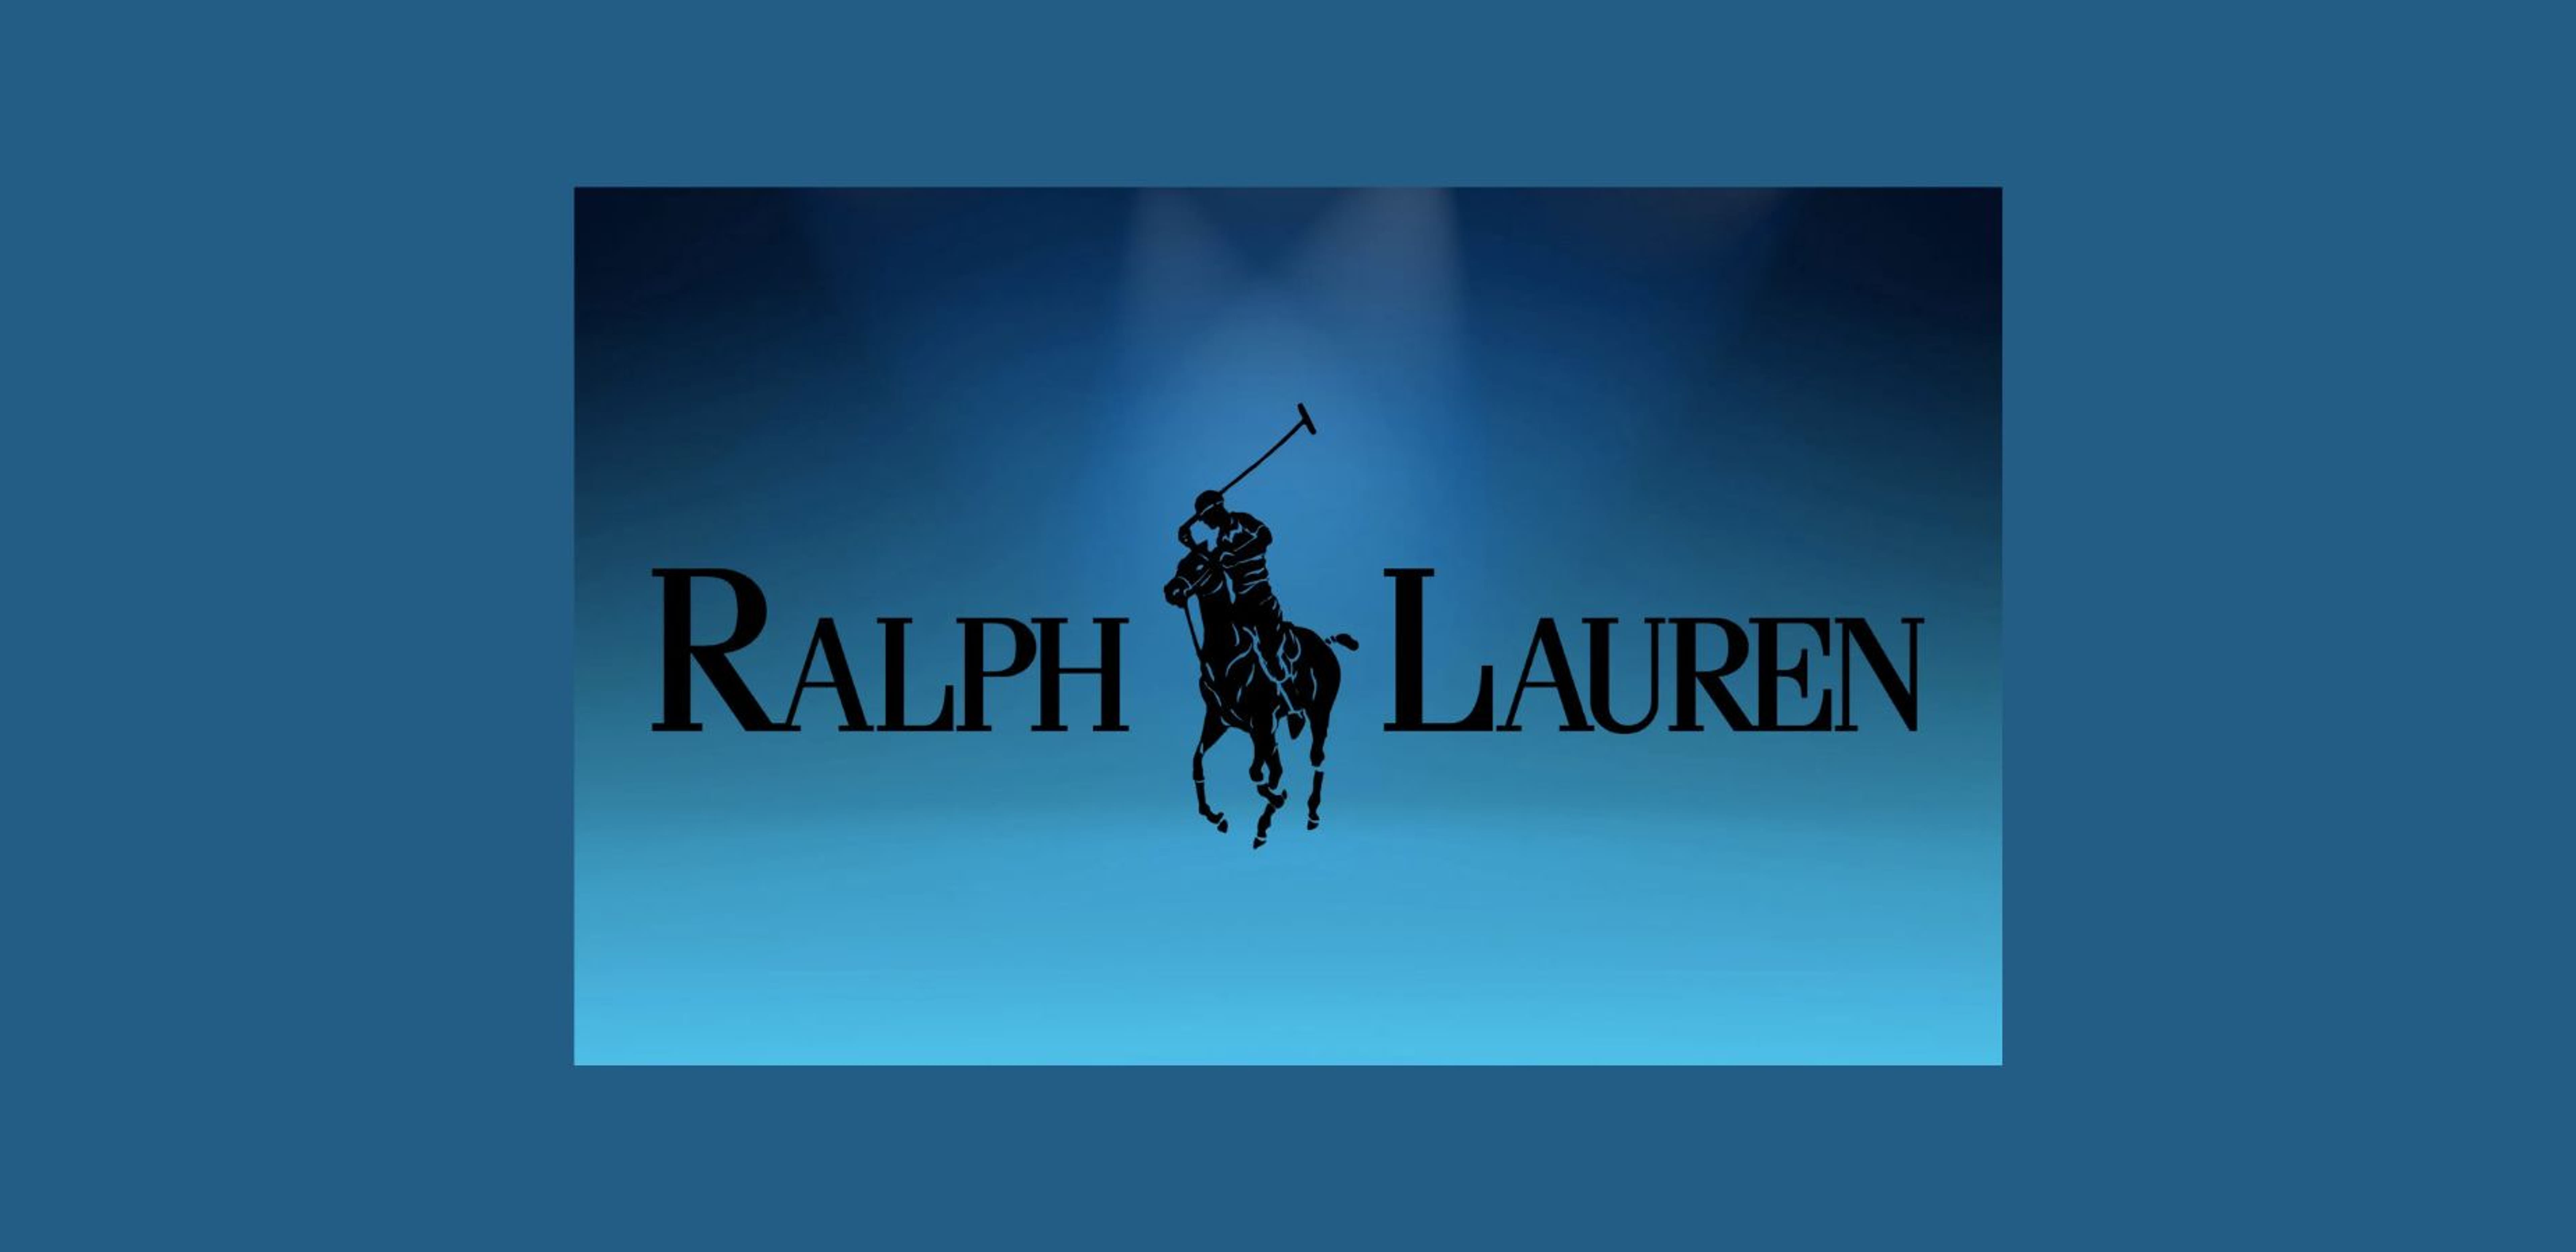 Ralph Lauren Gets Price Target Bumps By Analysts Following Better-Than-Expected Q4 Earnings